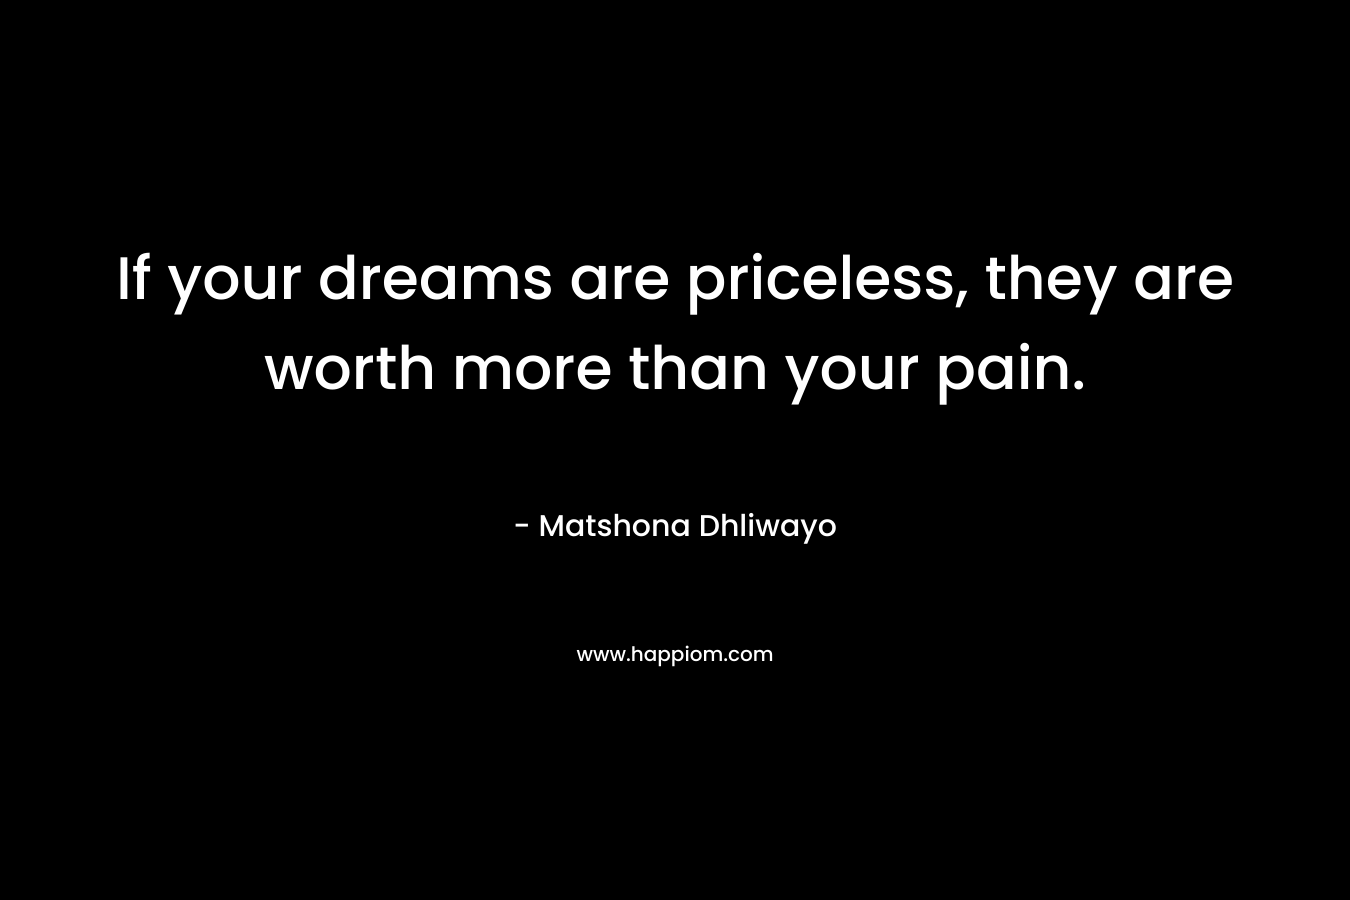 If your dreams are priceless, they are worth more than your pain.